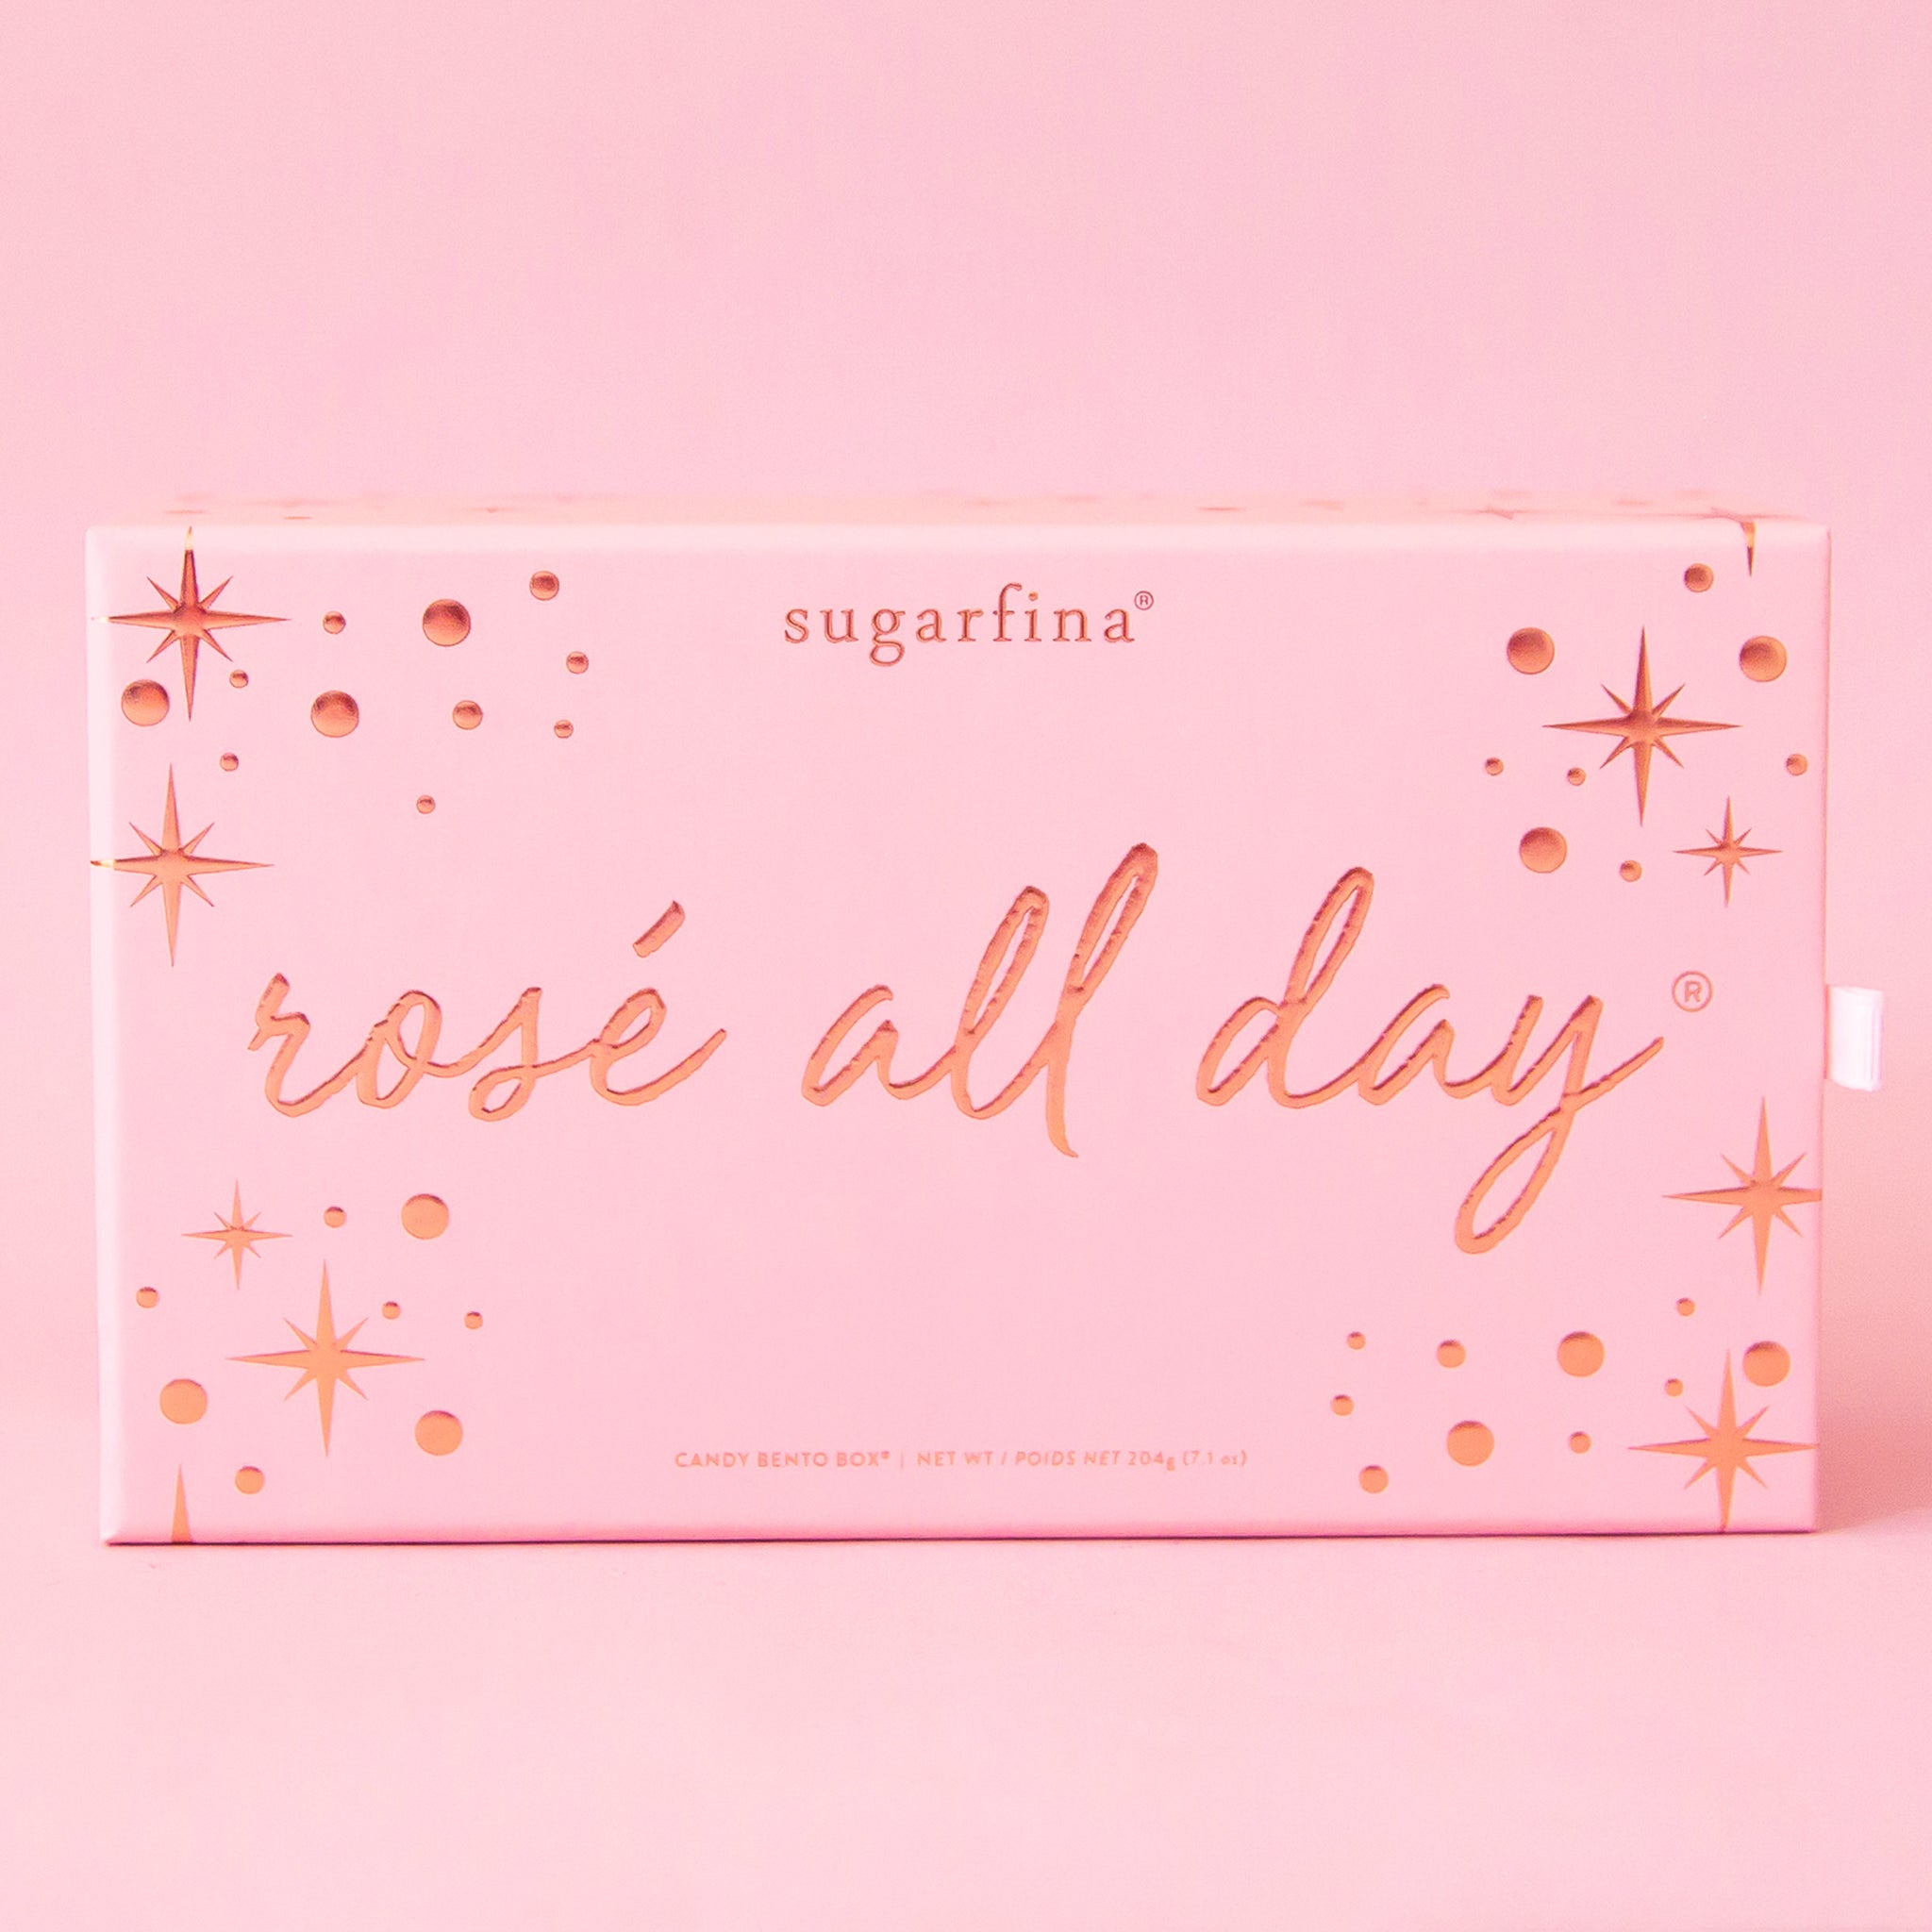 In front of a light pink background is a light pink rectangular box with a rose gold border and rose gold polka dots. In the middle is rose gold script text that reads ‘rosé all day.’